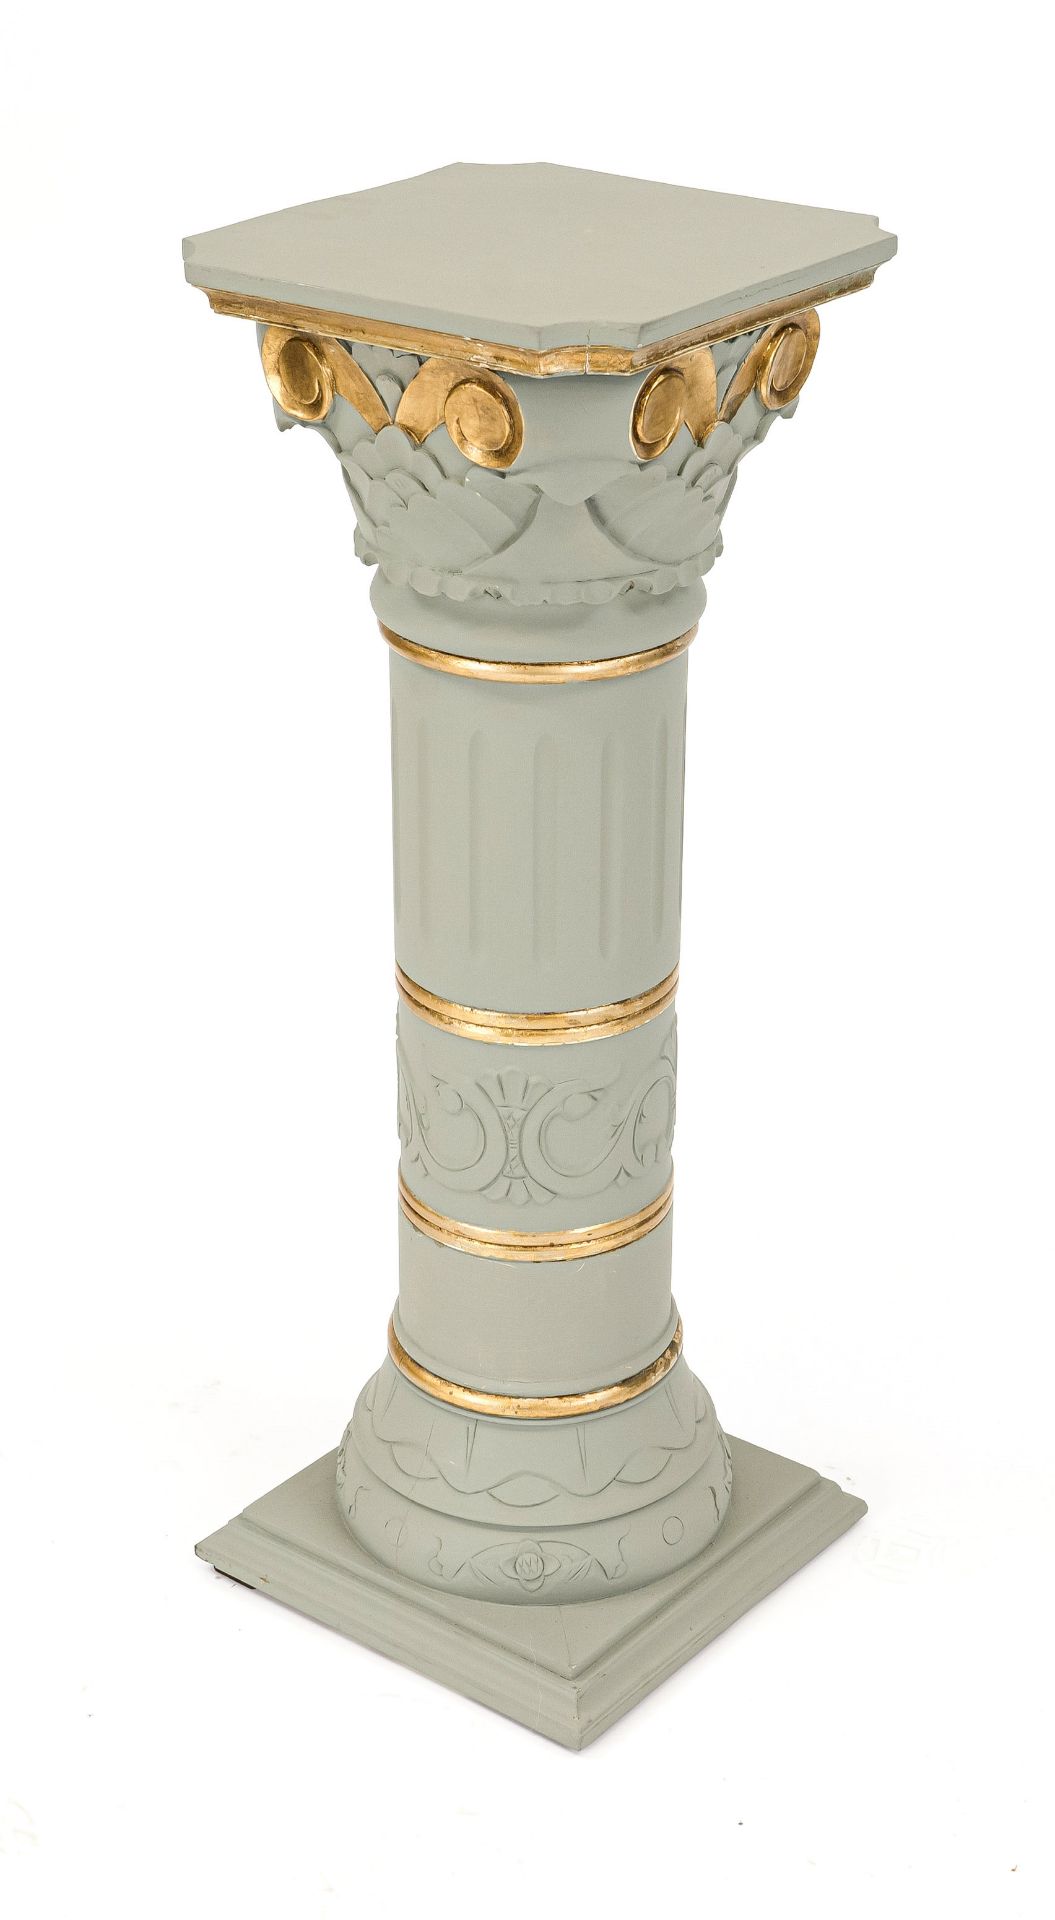 Flower column/palm pedestal, 21st century, plywood, painted and painted gold, h. 91 cm, top 33 x